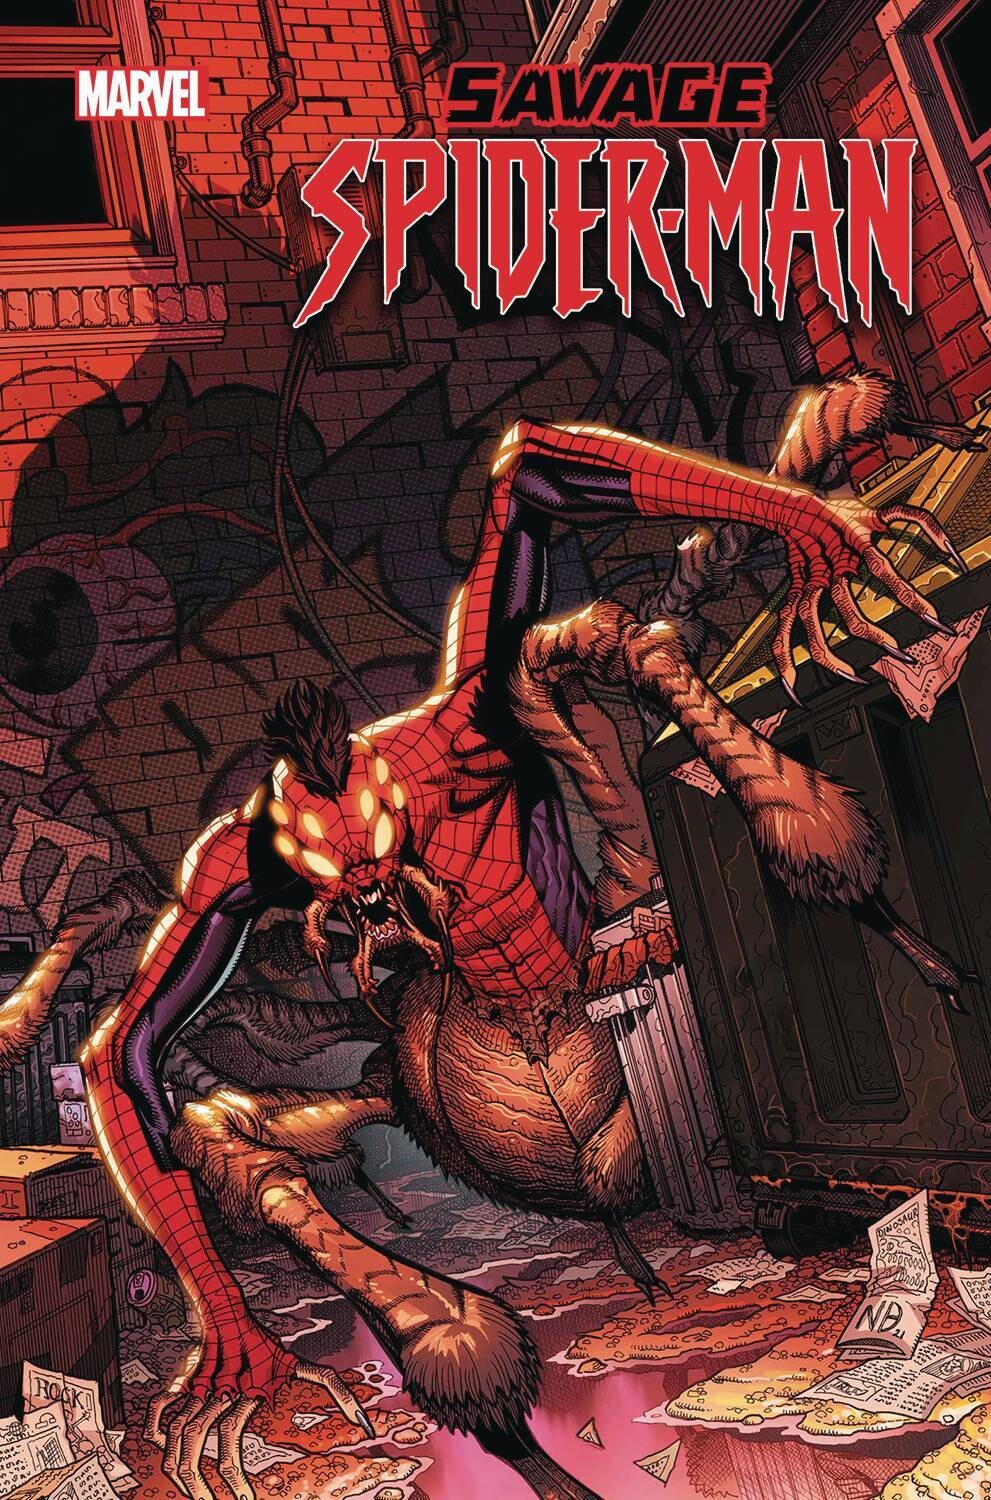 SAVAGE SPIDER-MAN #2 (OF 5)
MARVEL COMICS
(23rd March 2022)